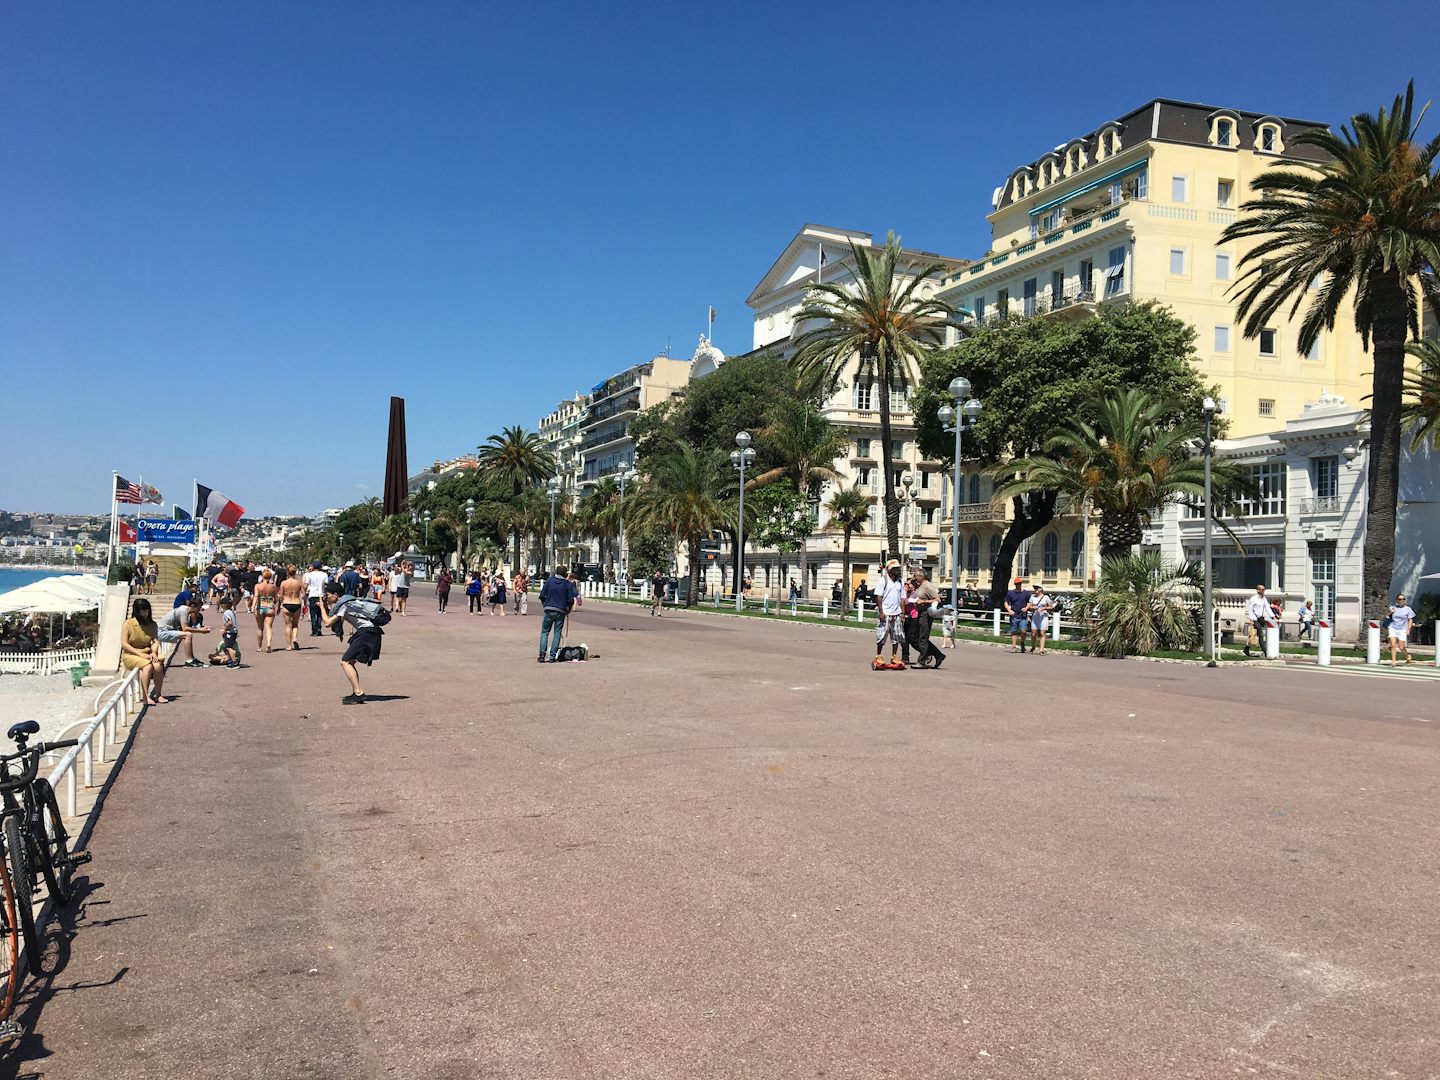 This was the beautiful beach in Nice.  Can’t wait to go back.  We had a l